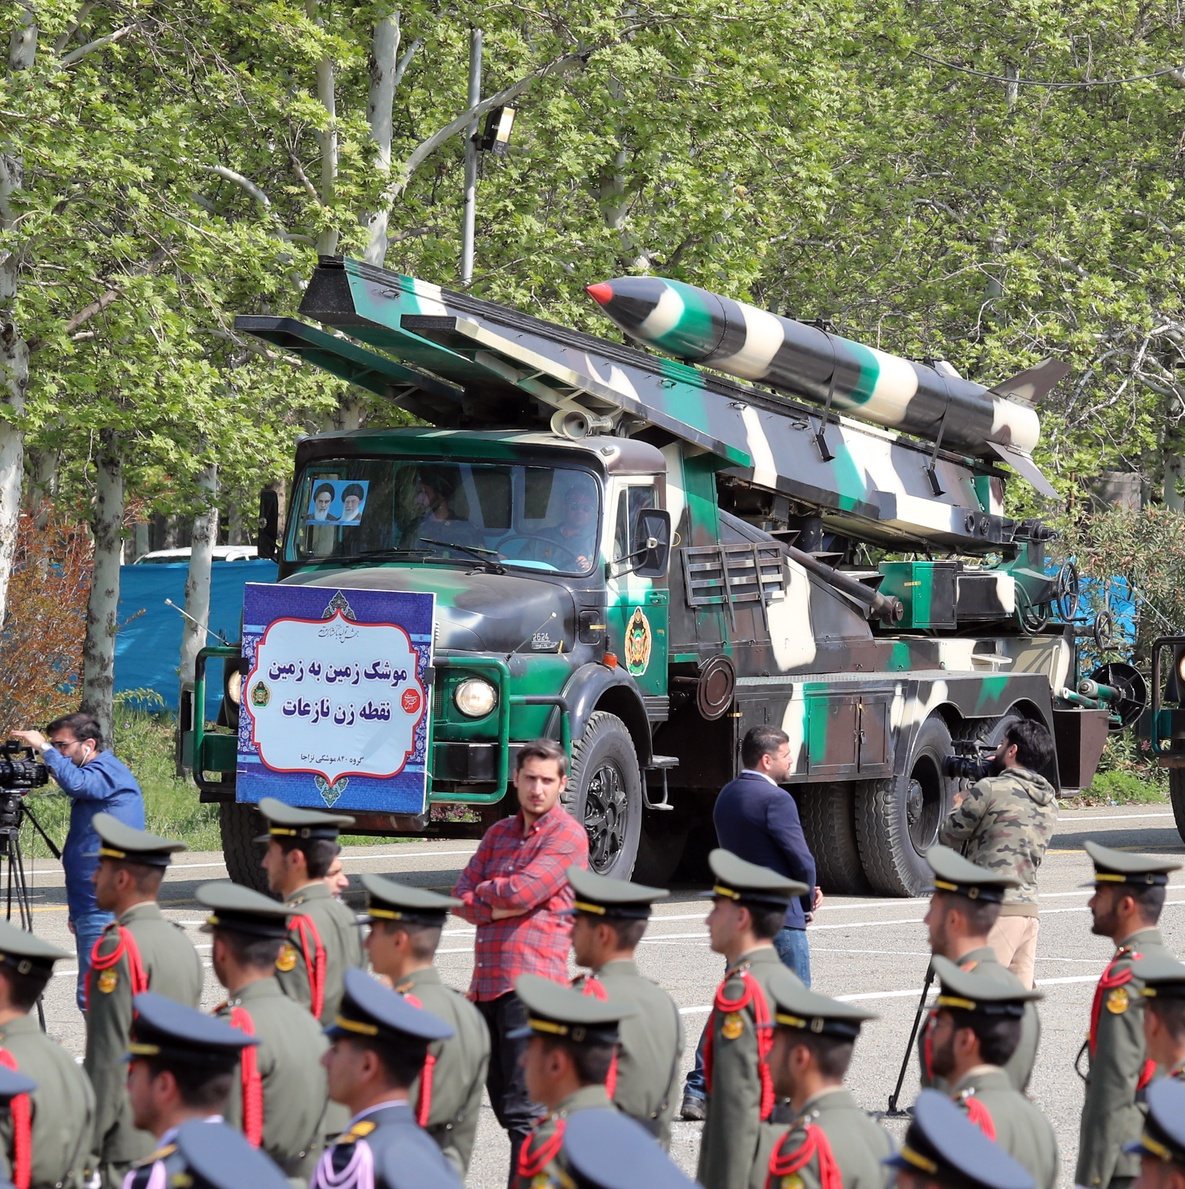 epa11283816 Iranian medium range missiles &#039;Nazeat&#039; are displayed during the annual Army Day celebration at a military base in Tehran, Iran, 17 April 2024. According to Iranian state media, Raisi described the recent attack launched towards Israel as &#039;limited&#039; and &#039;punitive&#039;, adding that any act of aggression against Iran will be dealt with a &#039;powerful and fierce&#039; response. Iran&#039;s Islamic Revolutionary Guards Corps (IRGC) launched drones and rockets towards Israel late on 13 April.  EPA/ABEDIN TAHERKENAREH